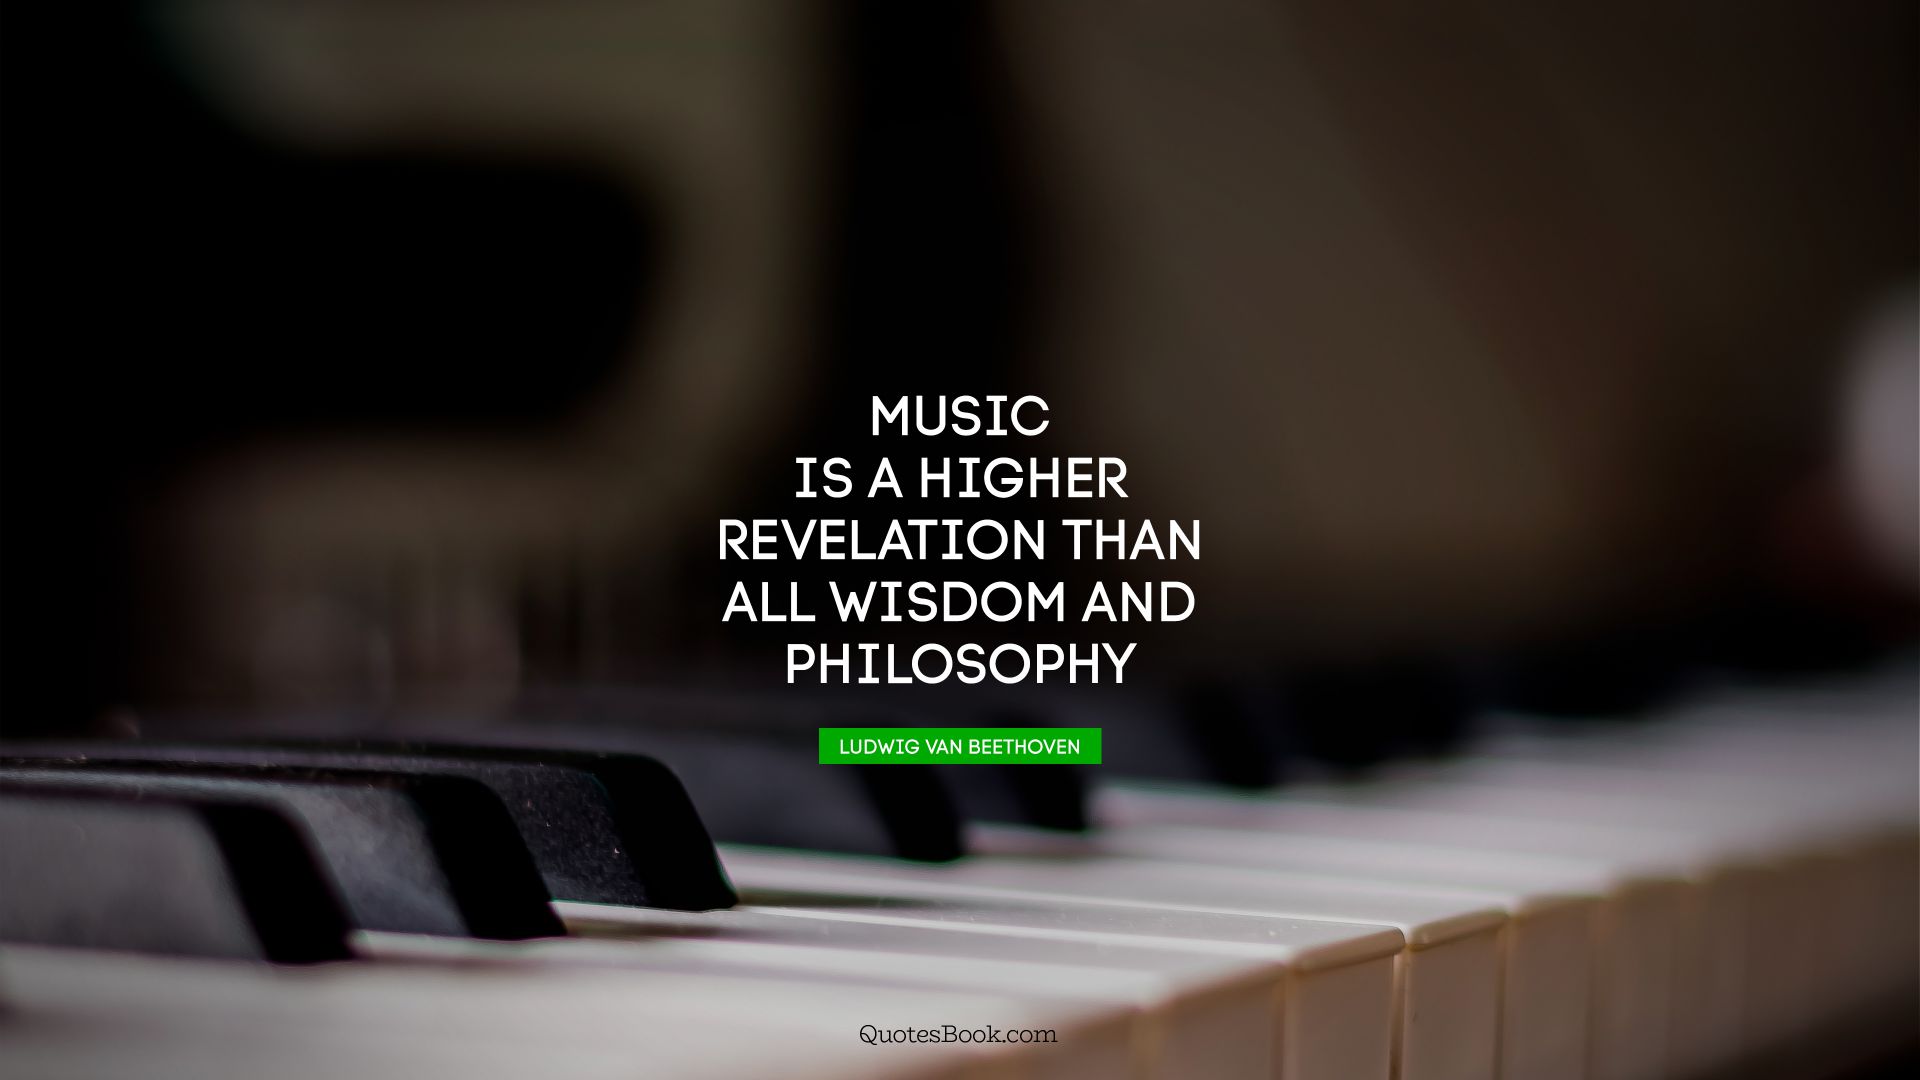 Music is a higher revelation than all wisdom and philosophy. - Quote by Ludwig van Beethoven